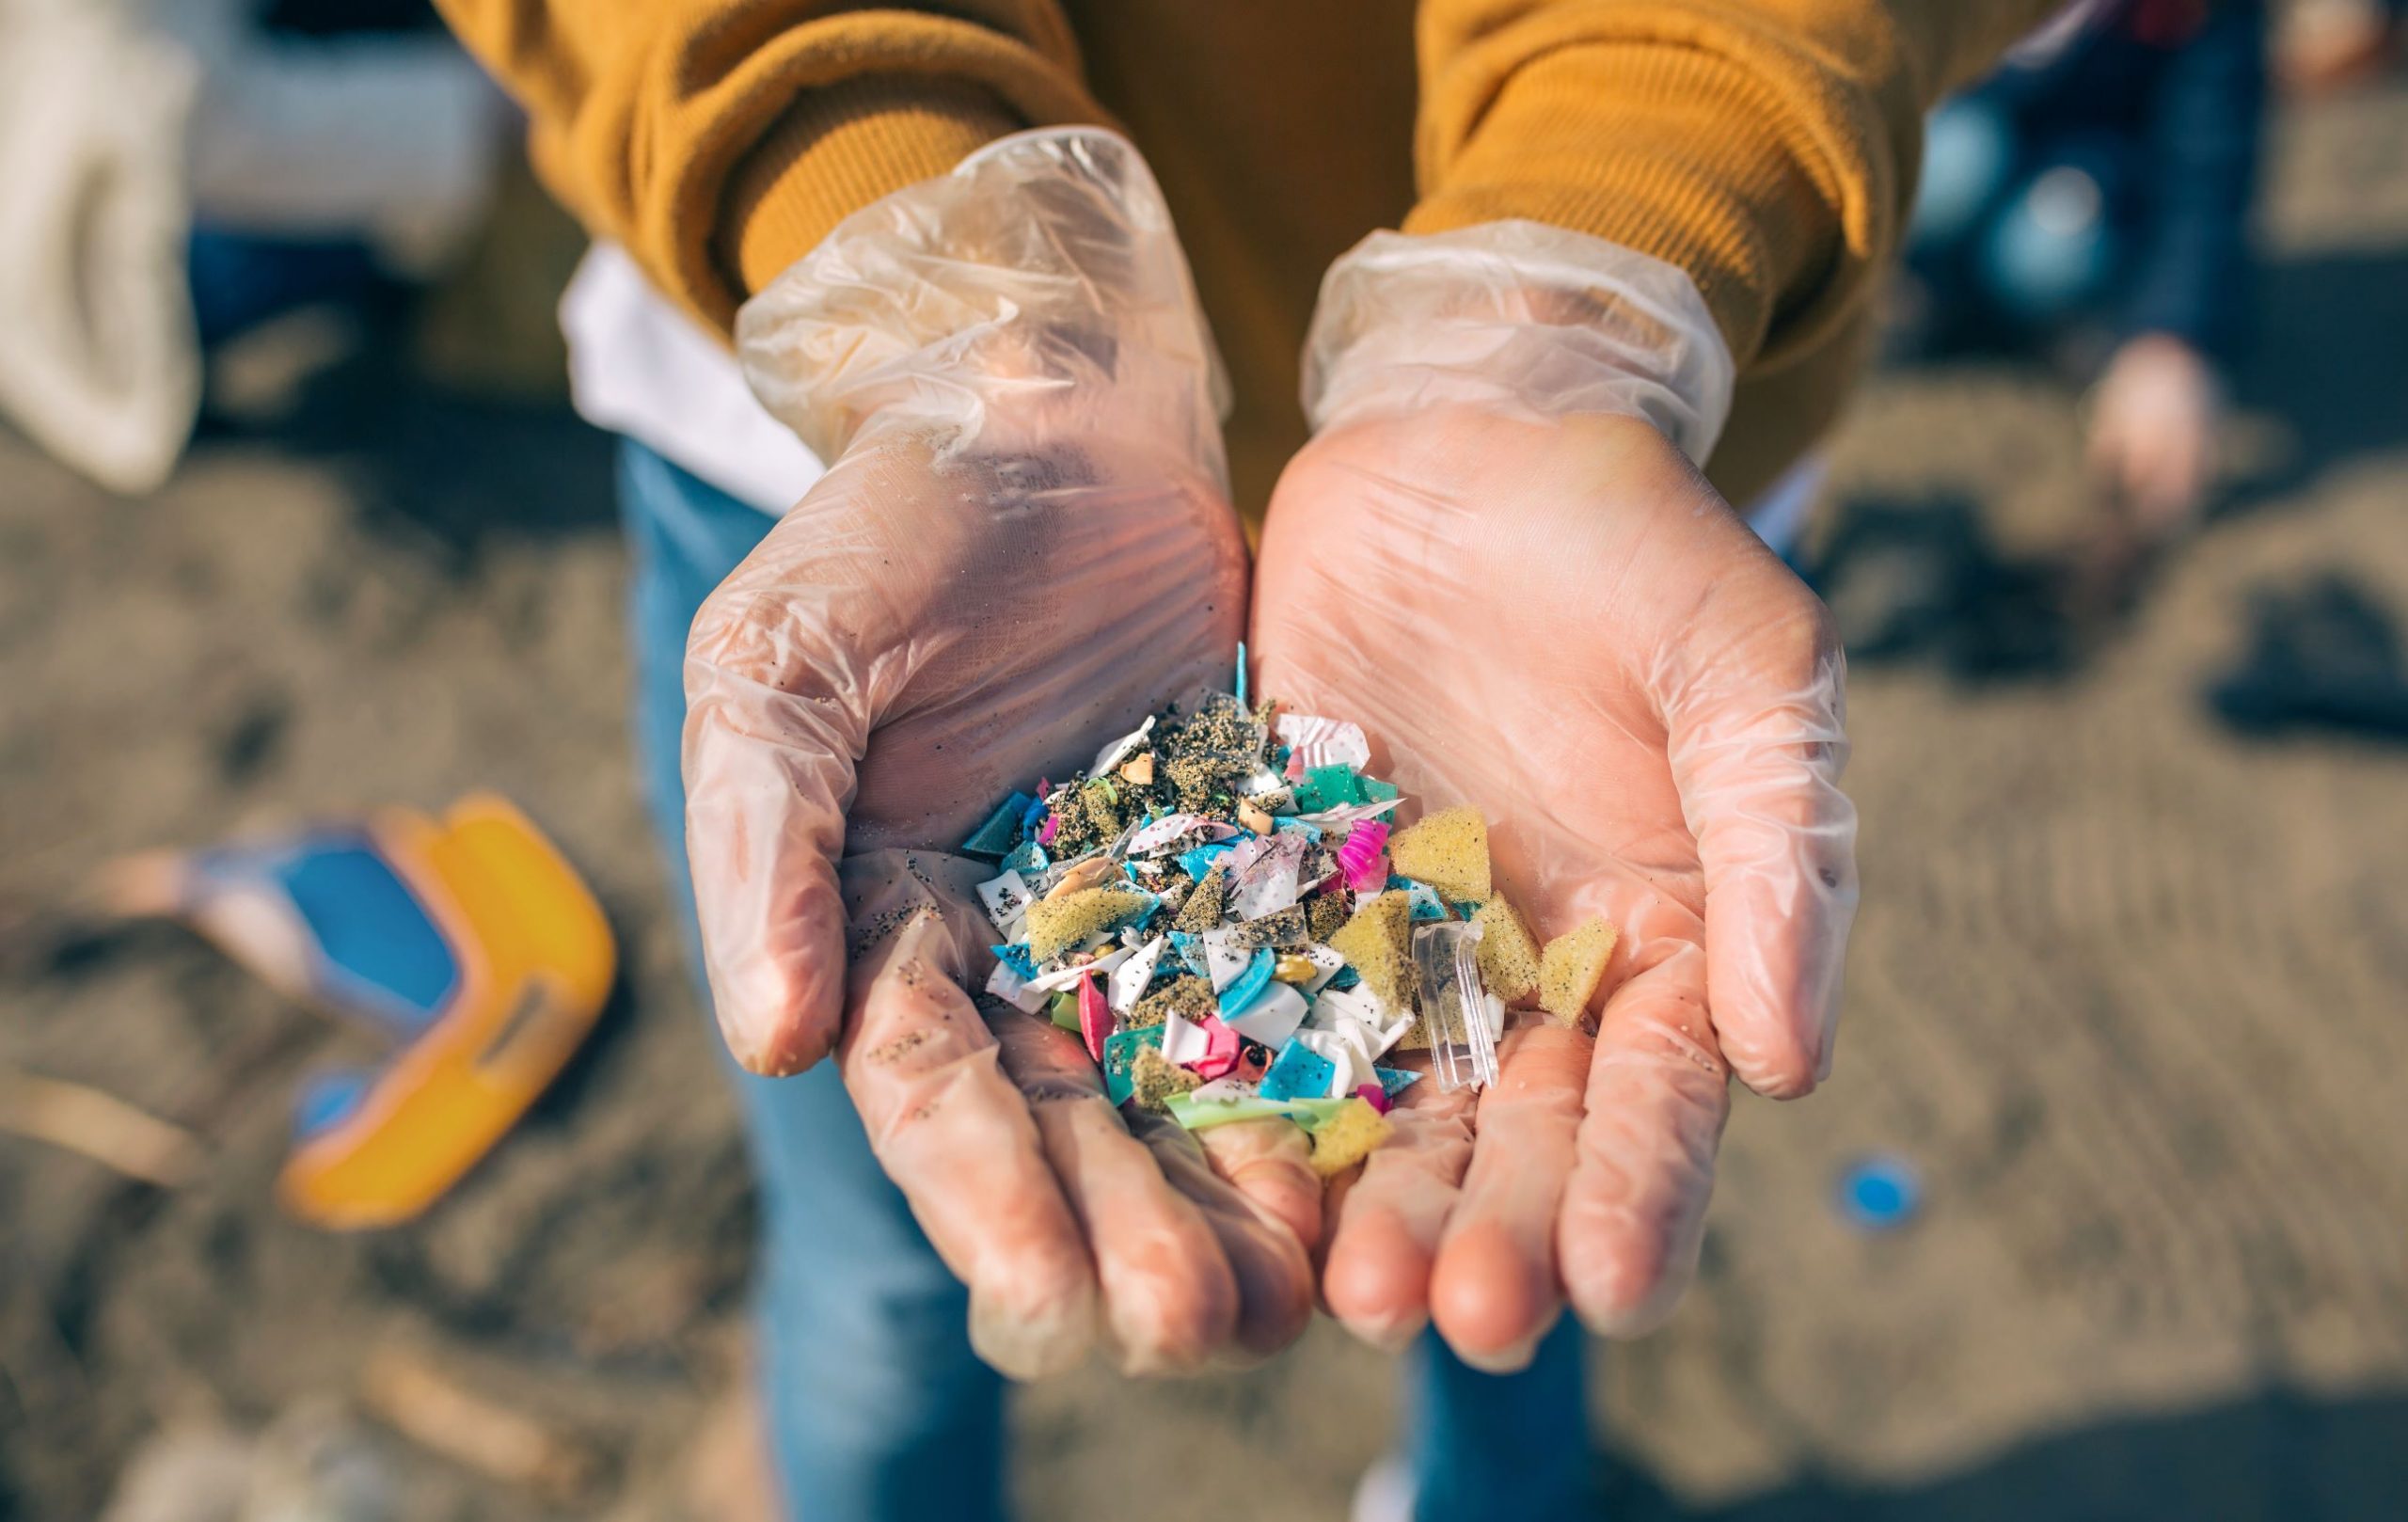 Microplastics – How Brands and Designers Can Solve the Problem